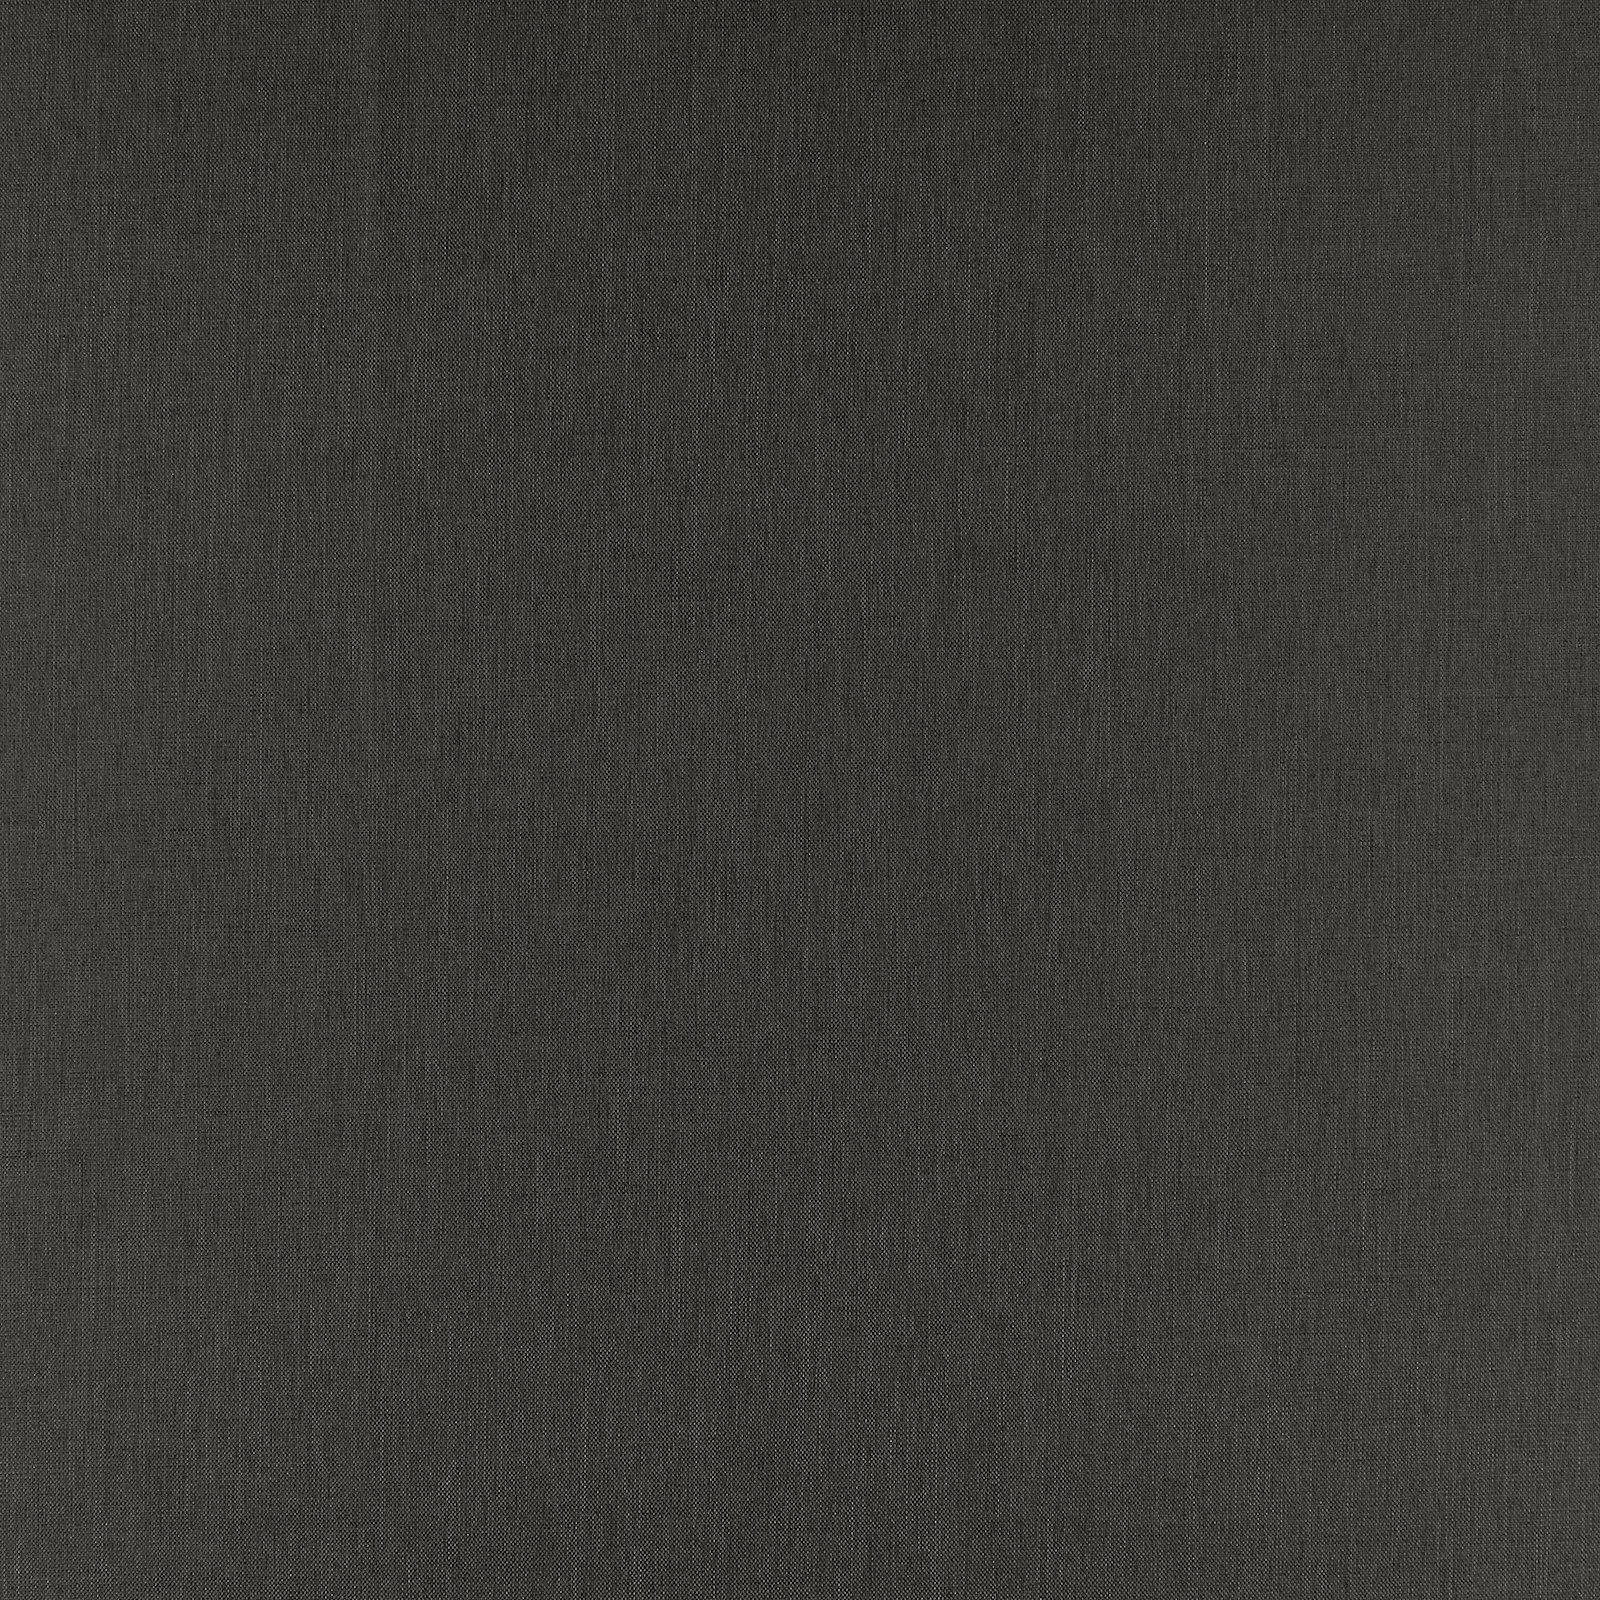 Upholstery fabric charcoal melange 826571_pack_solid